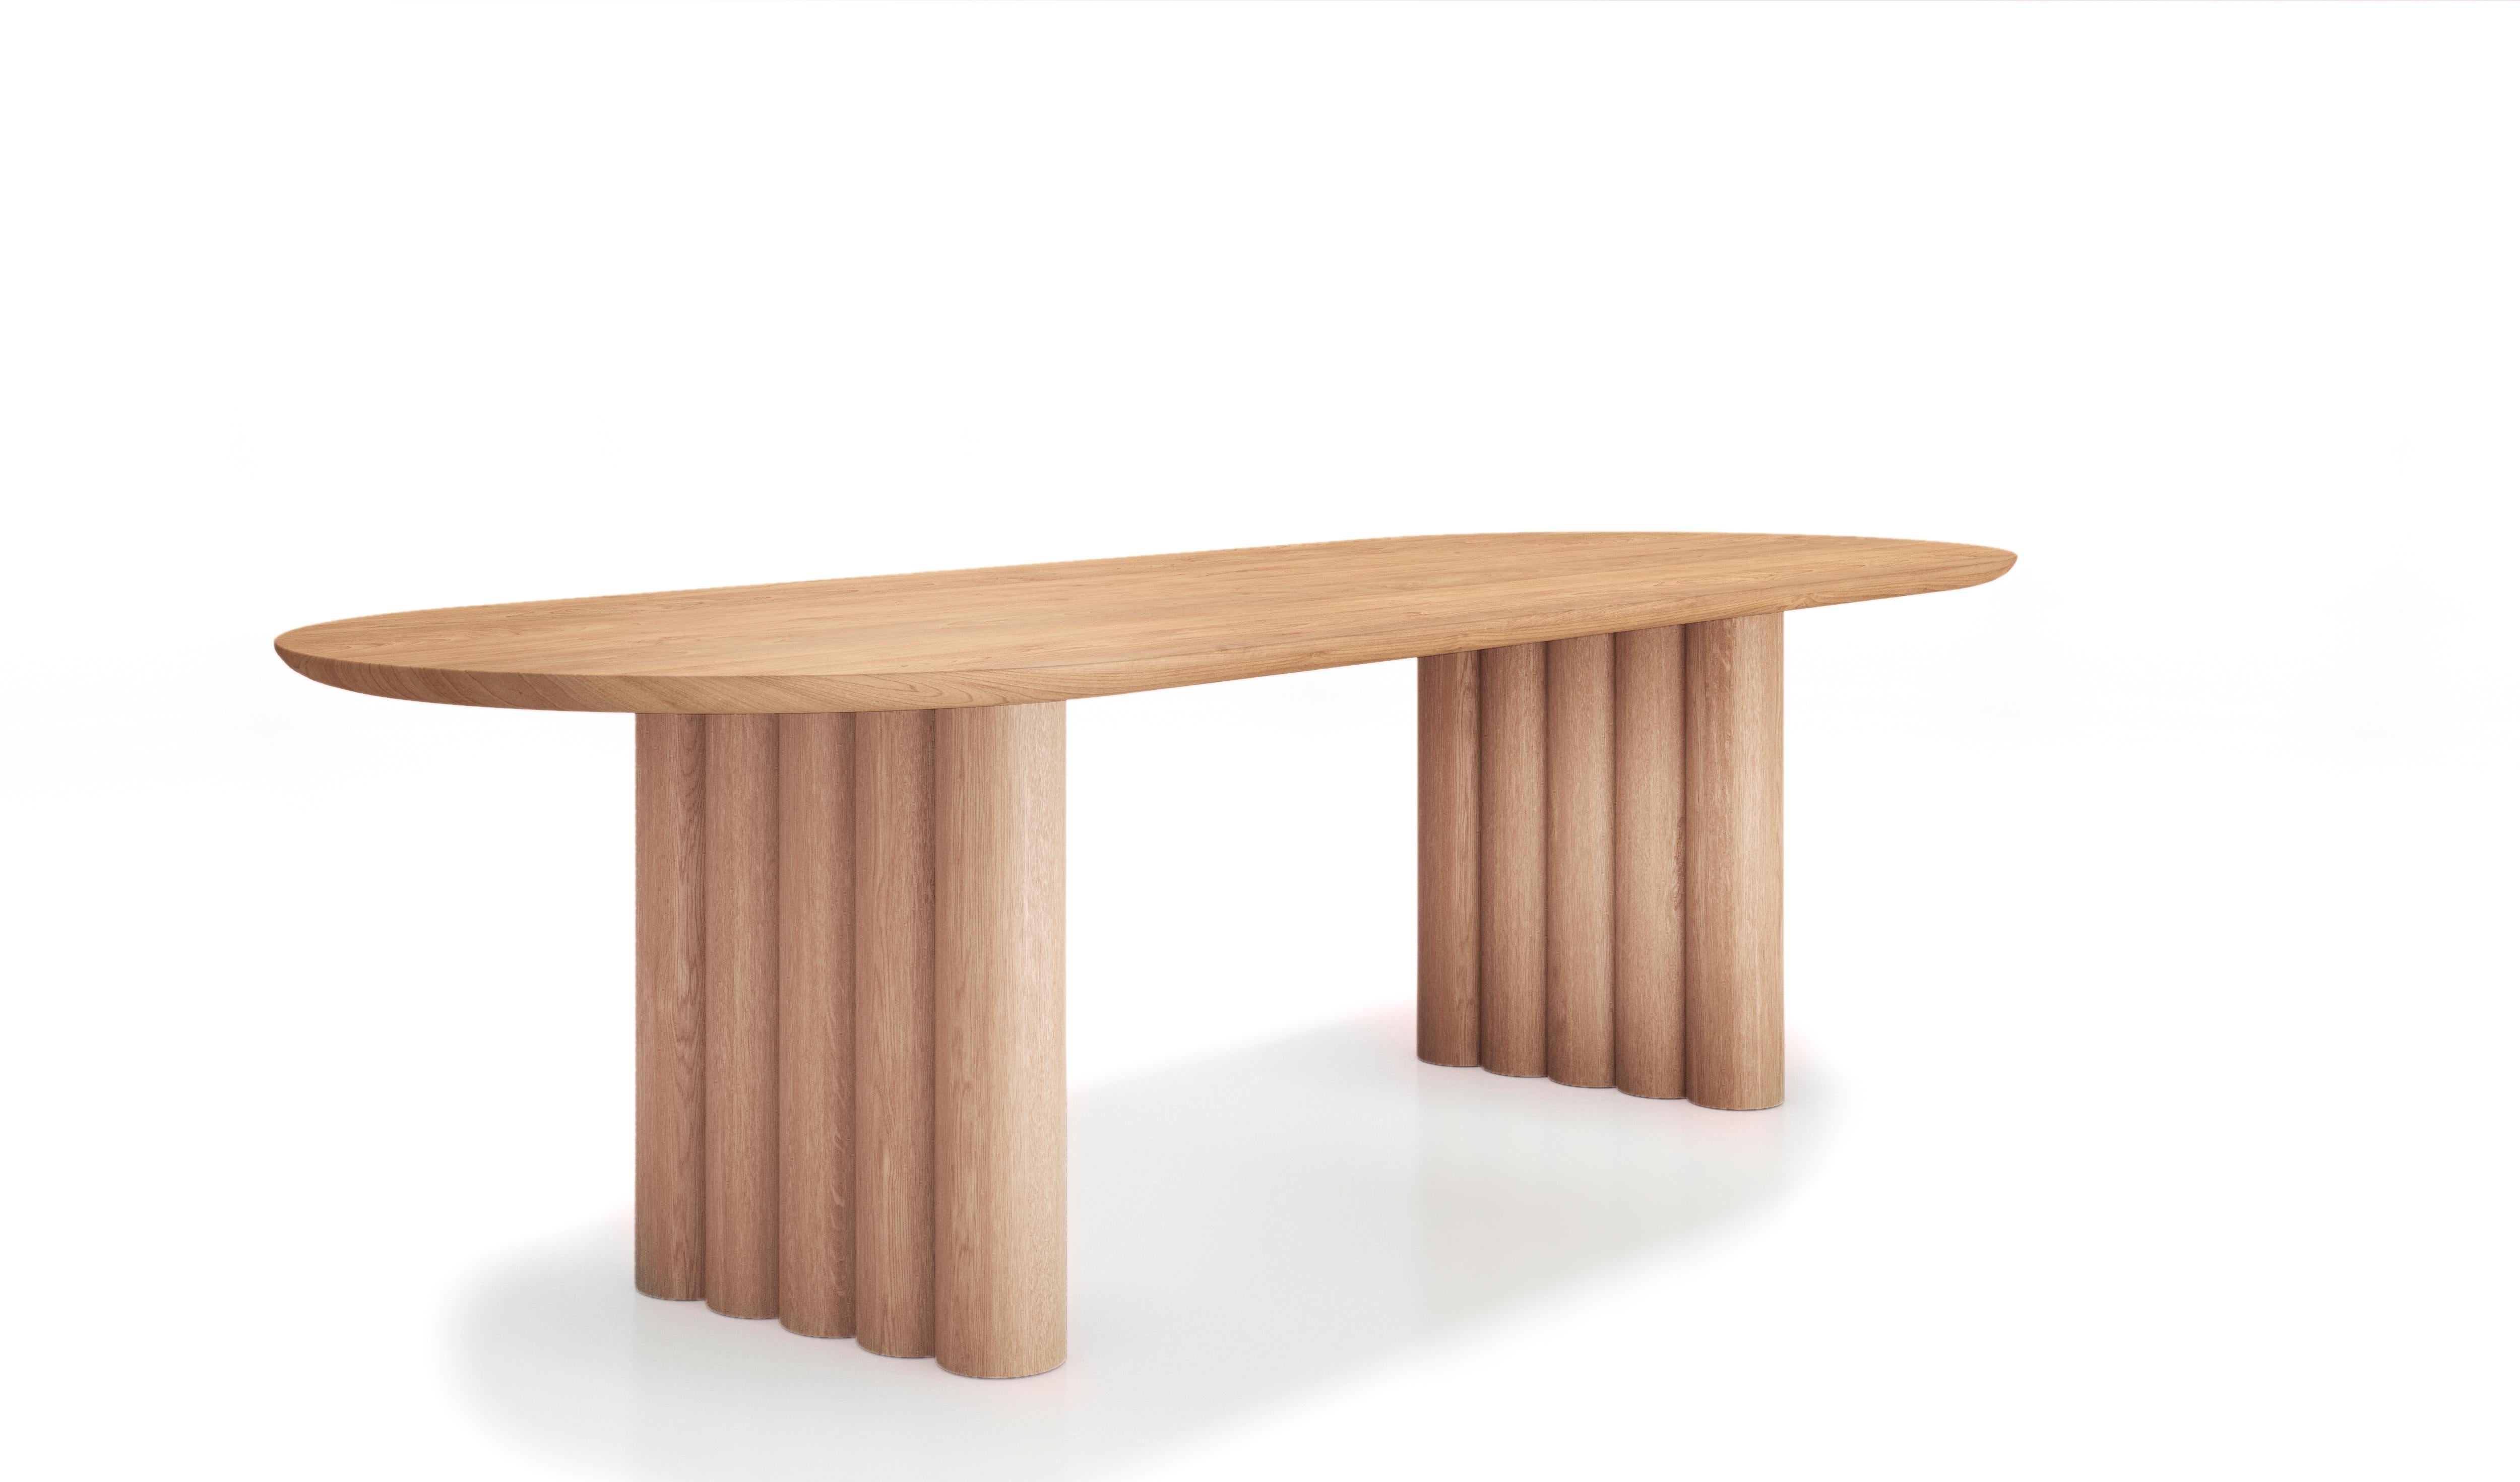 Danish Contemporary Dining Table 'Plush' by Dk3, Oak, 240 cm For Sale